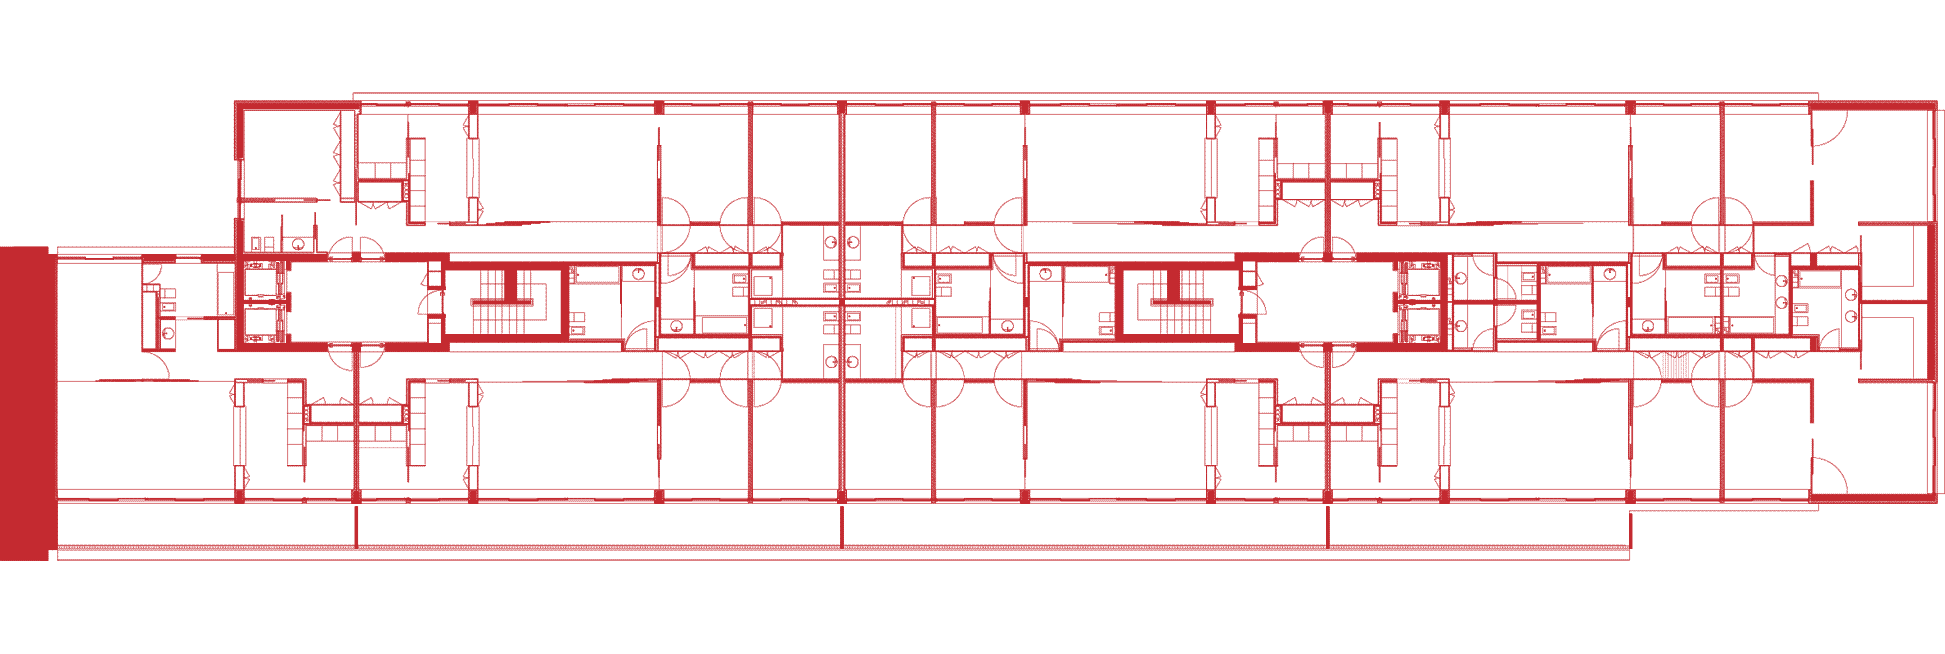 A floorplan of the Collective Housing